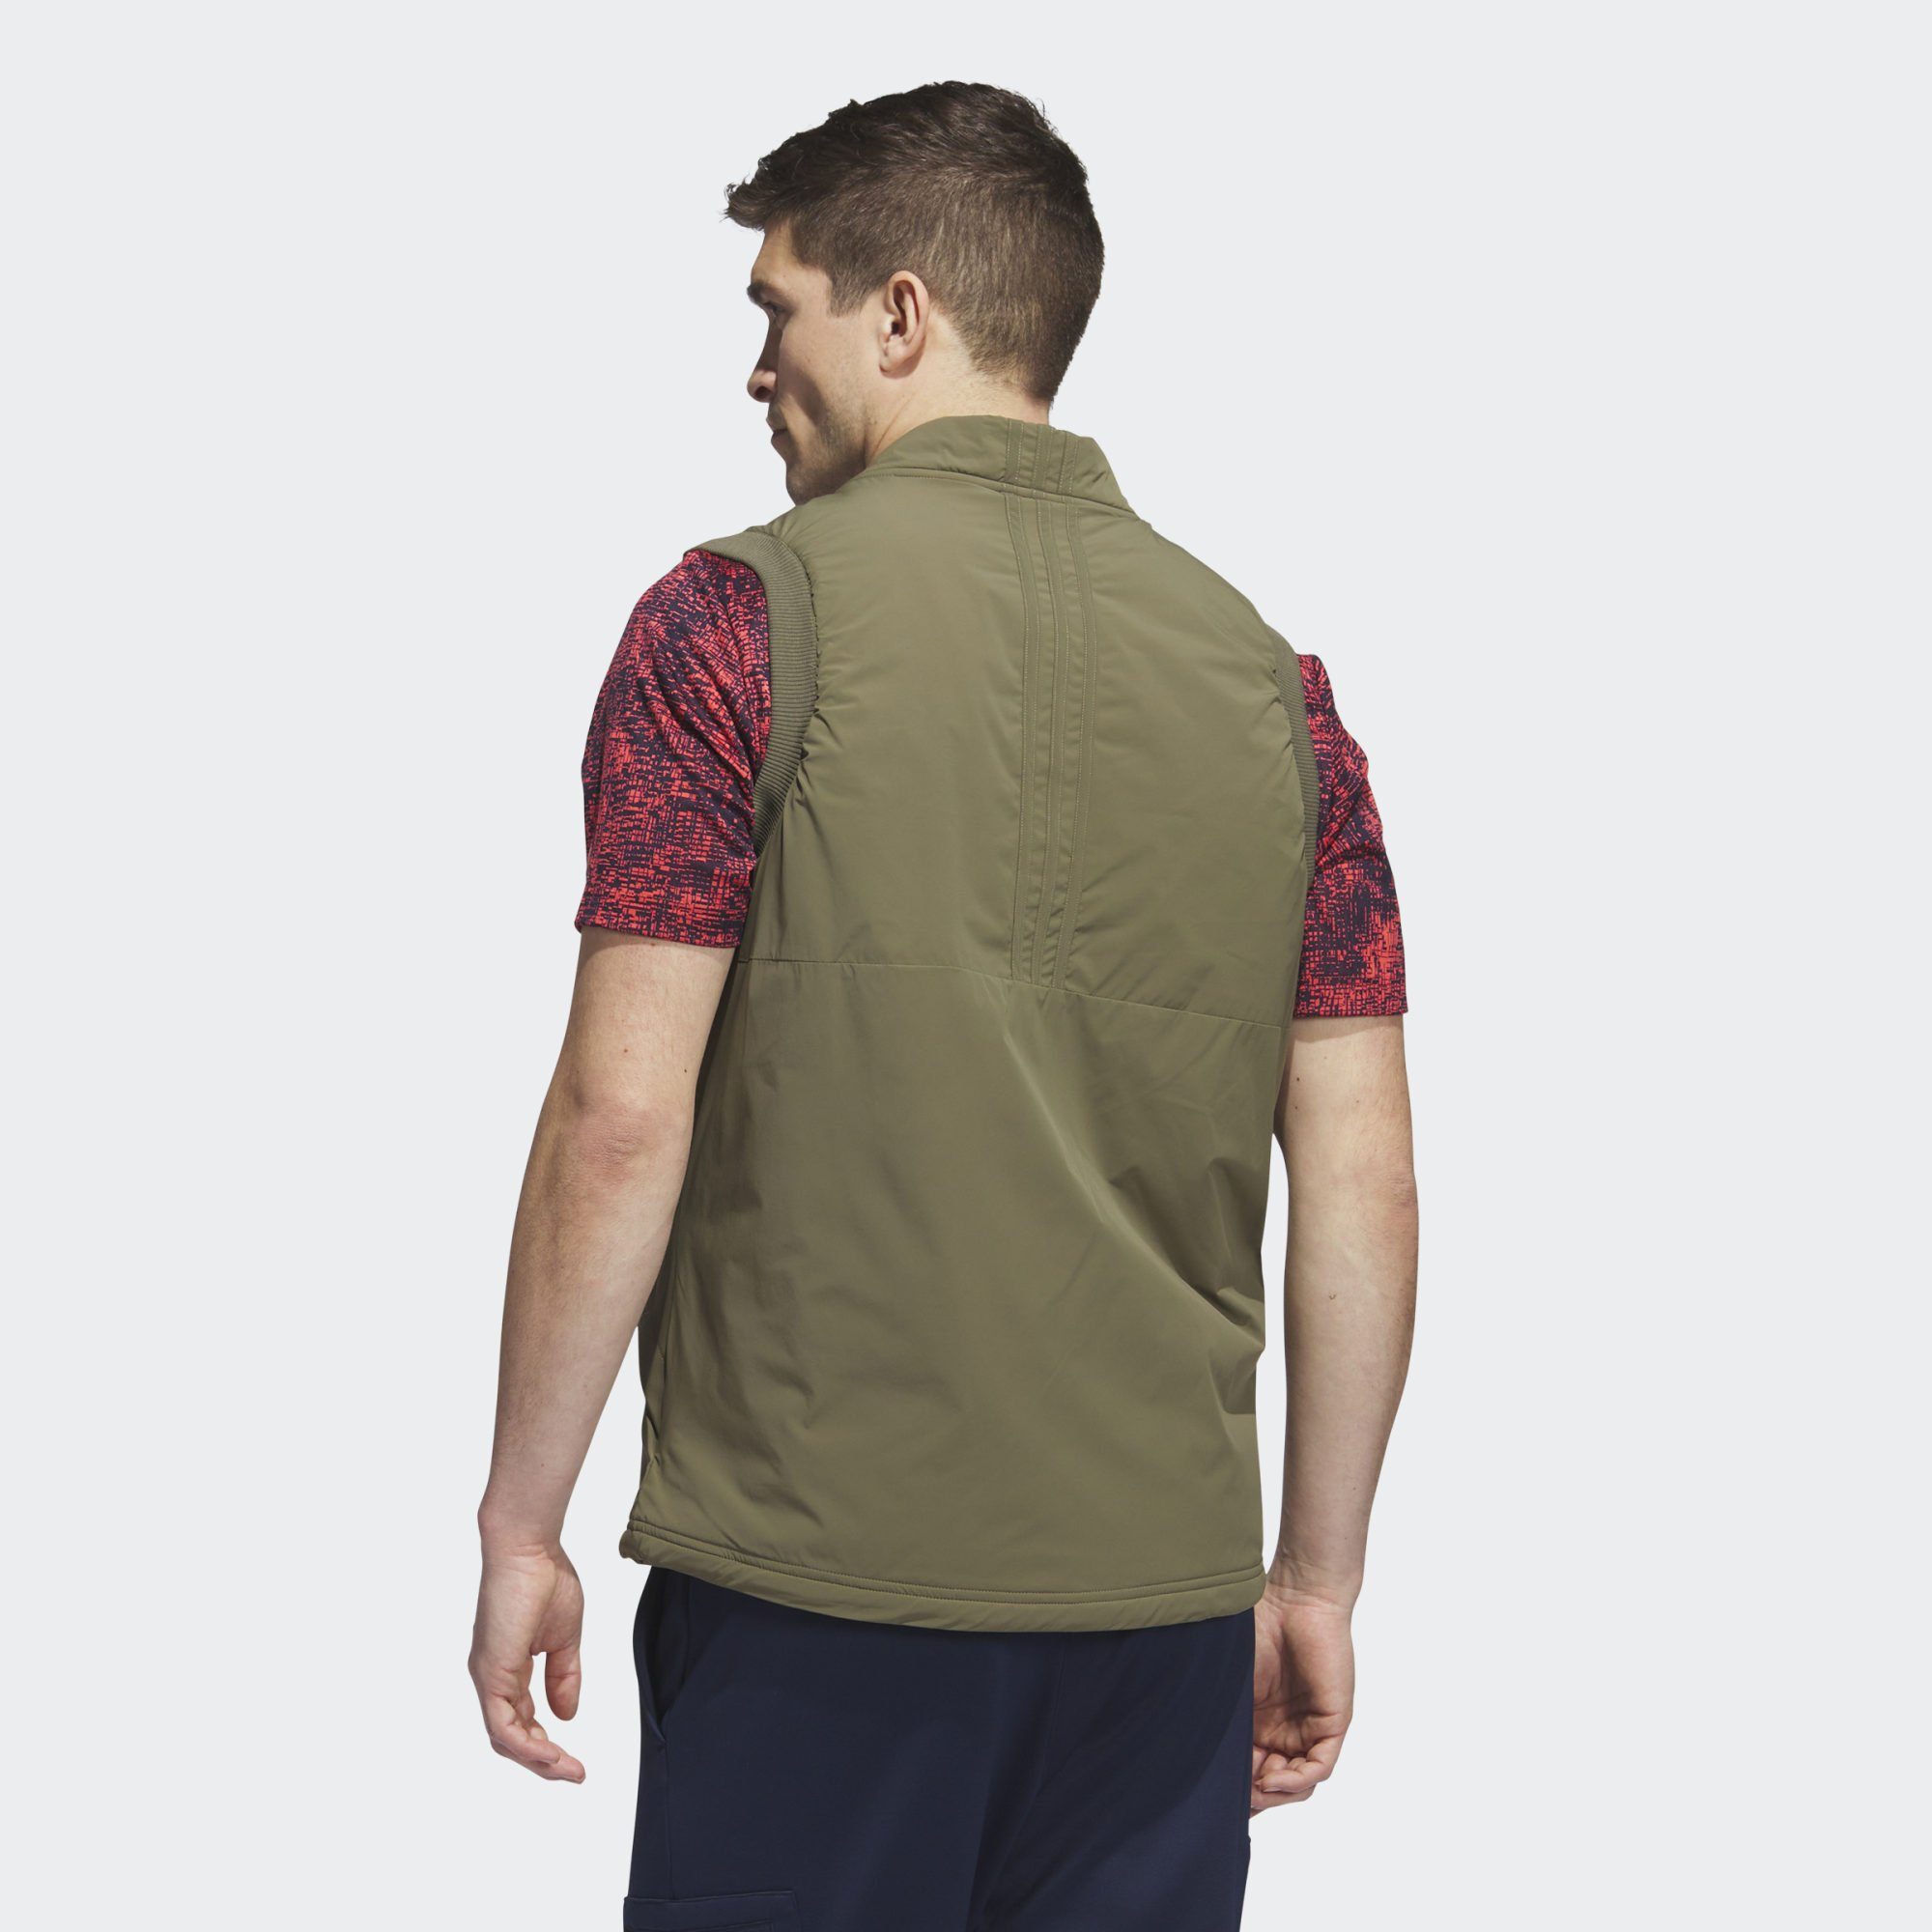 FULL-ZIP WESTE Olive Strata Performance PADDED adidas TOUR Funktionsweste FROSTGUARD ULTIMATE365